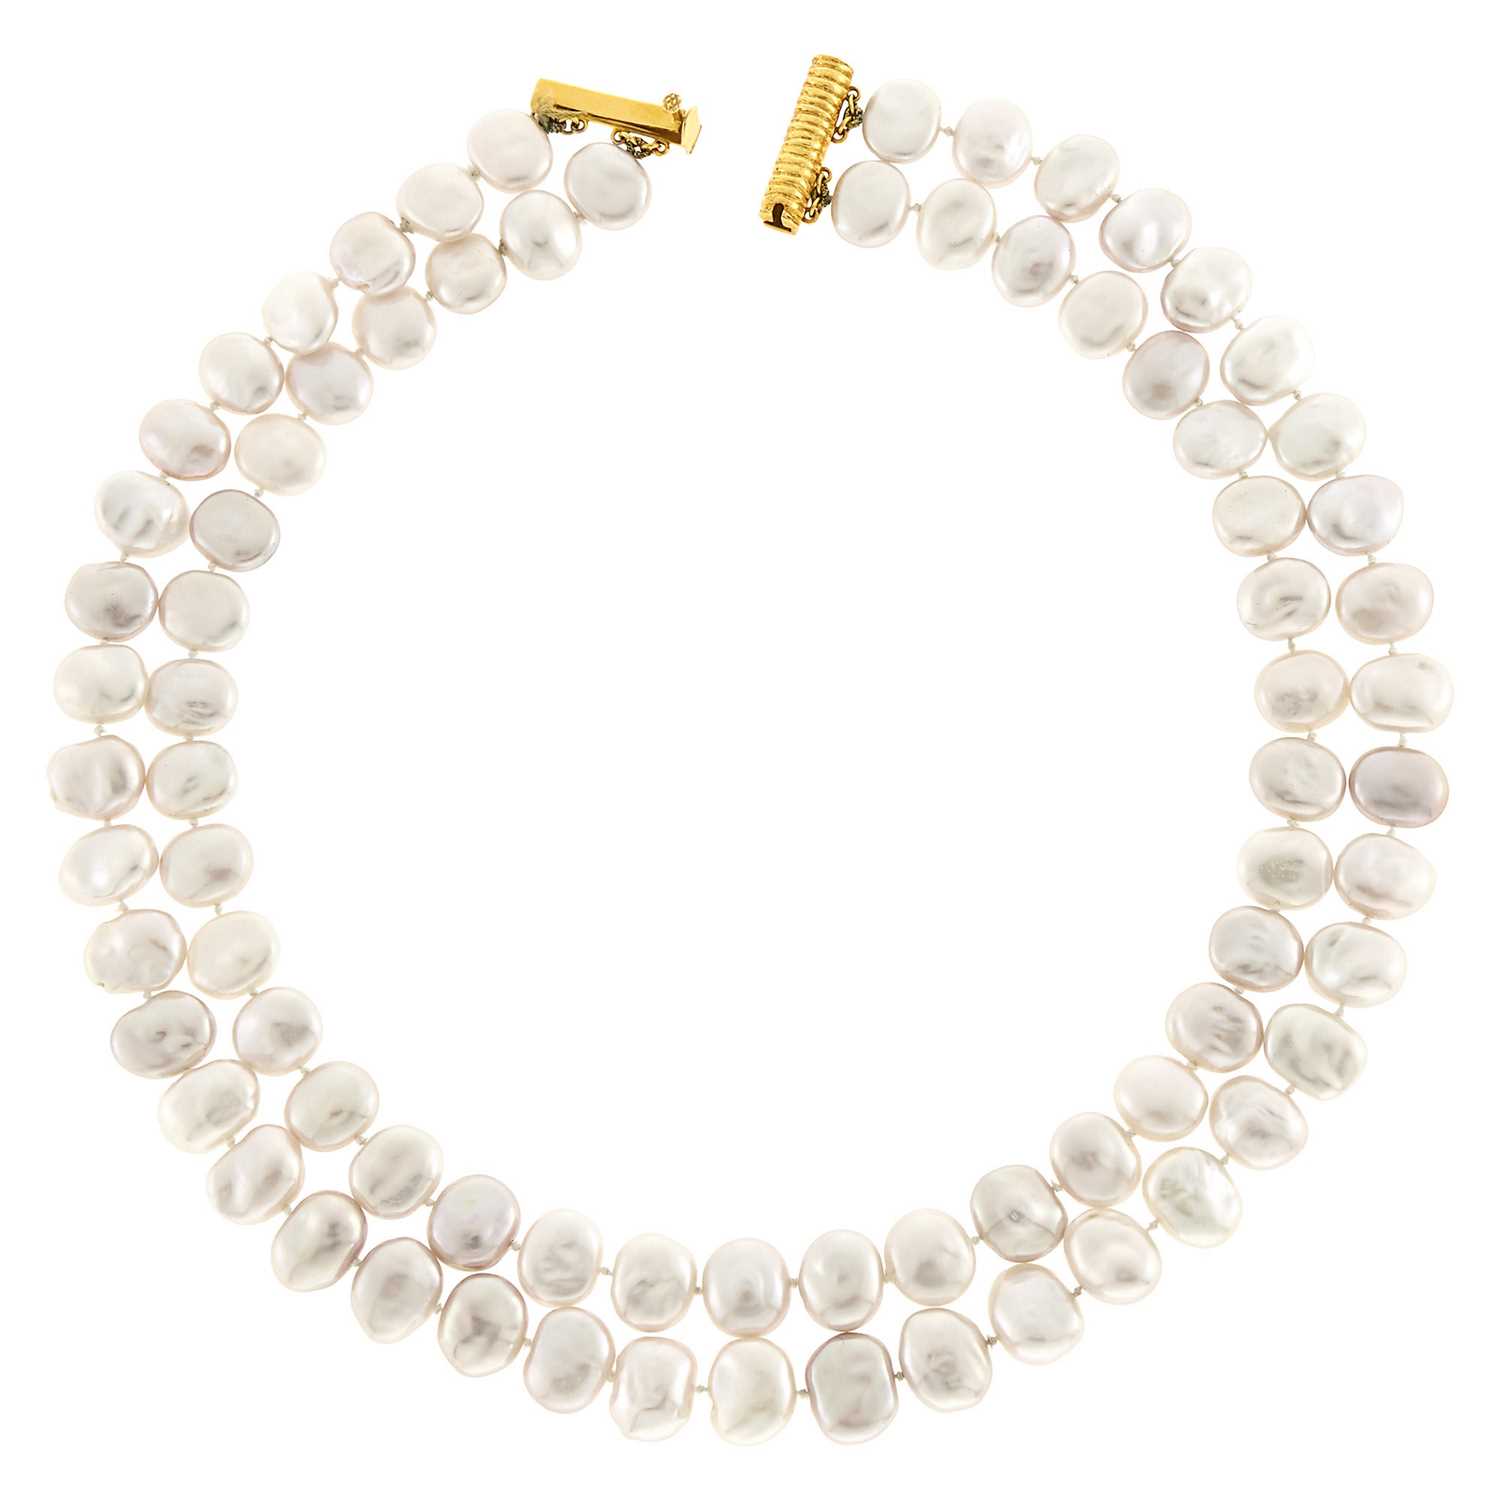 Lot 2010 - Double Strand Pink Freshwater Pearl Necklace with Gold Clasp